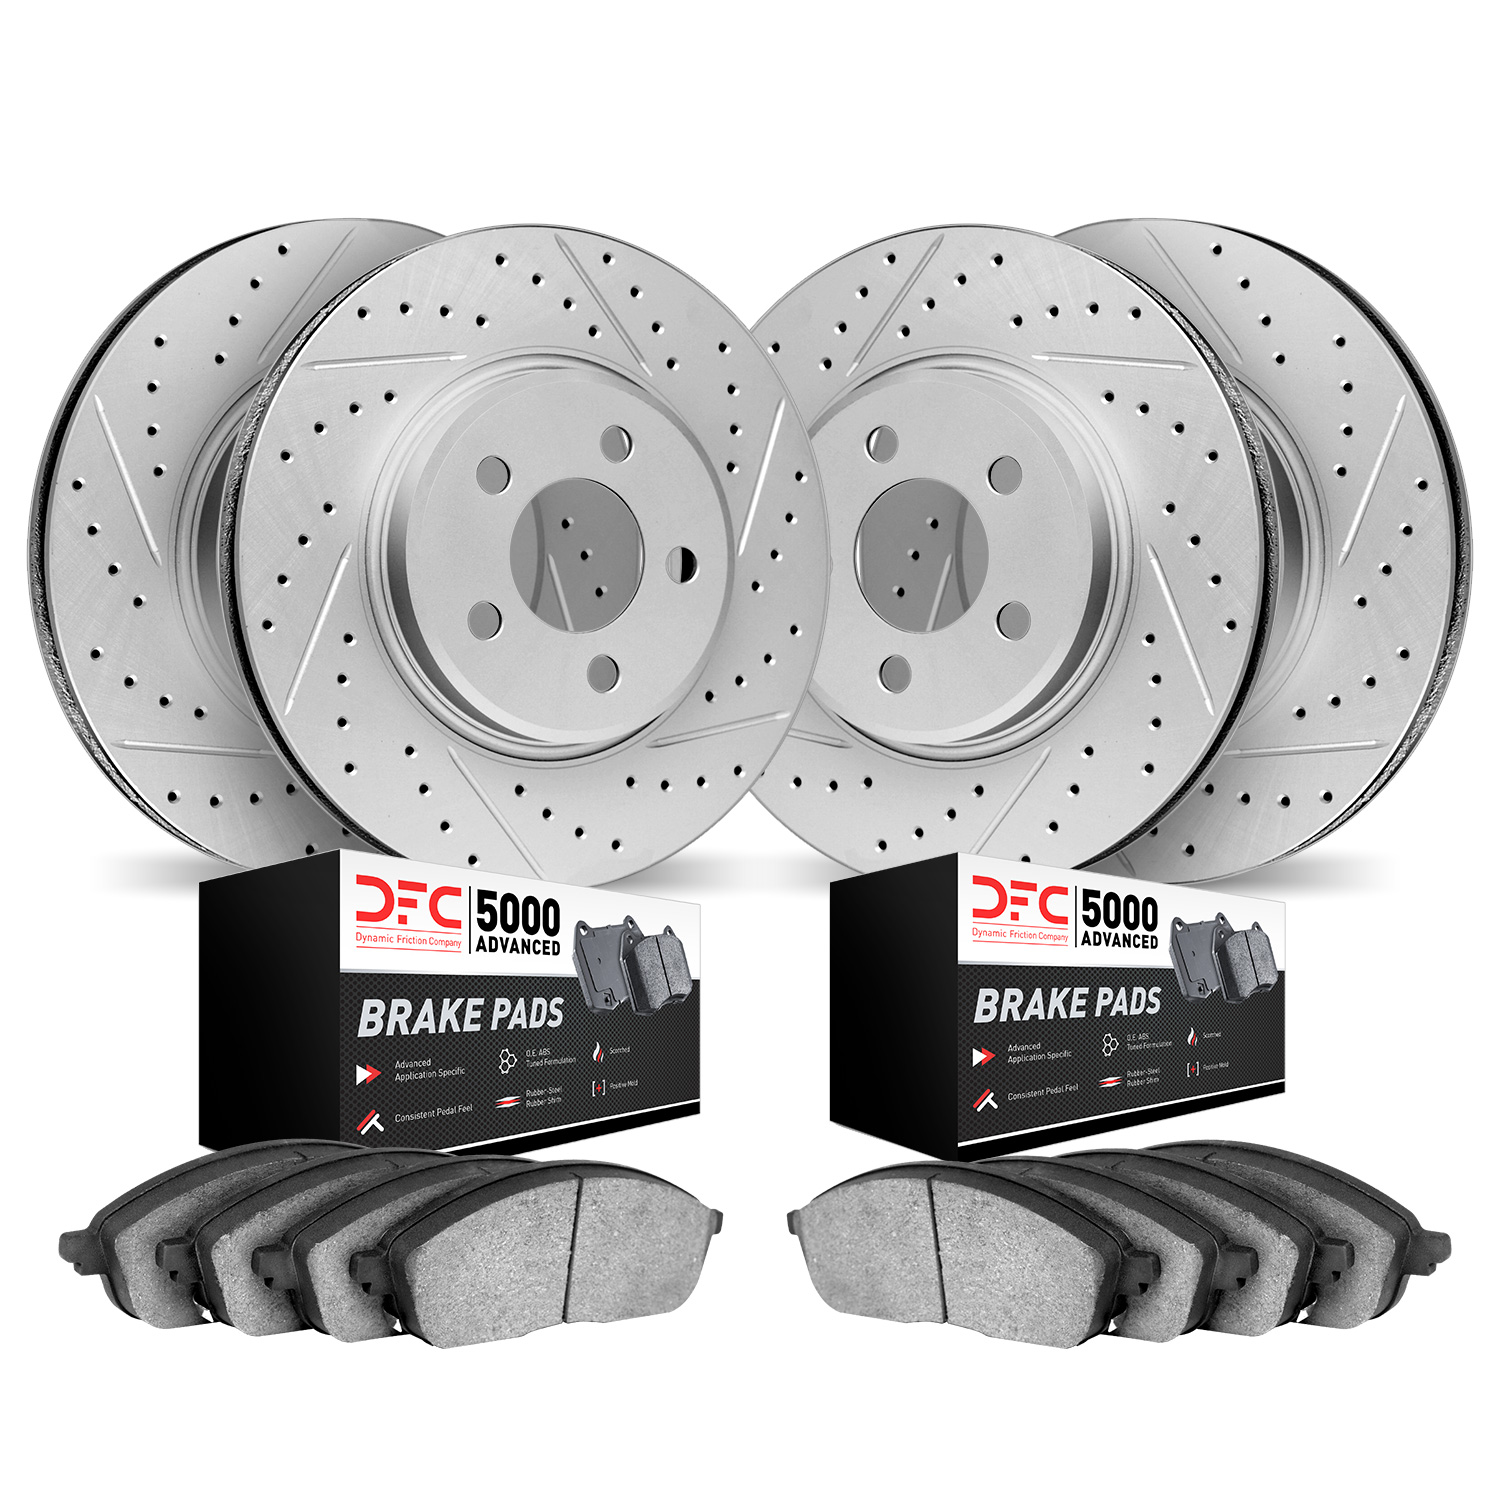 2504-46032 Geoperformance Drilled/Slotted Rotors w/5000 Advanced Brake Pads Kit, 2016-2018 GM, Position: Front and Rear